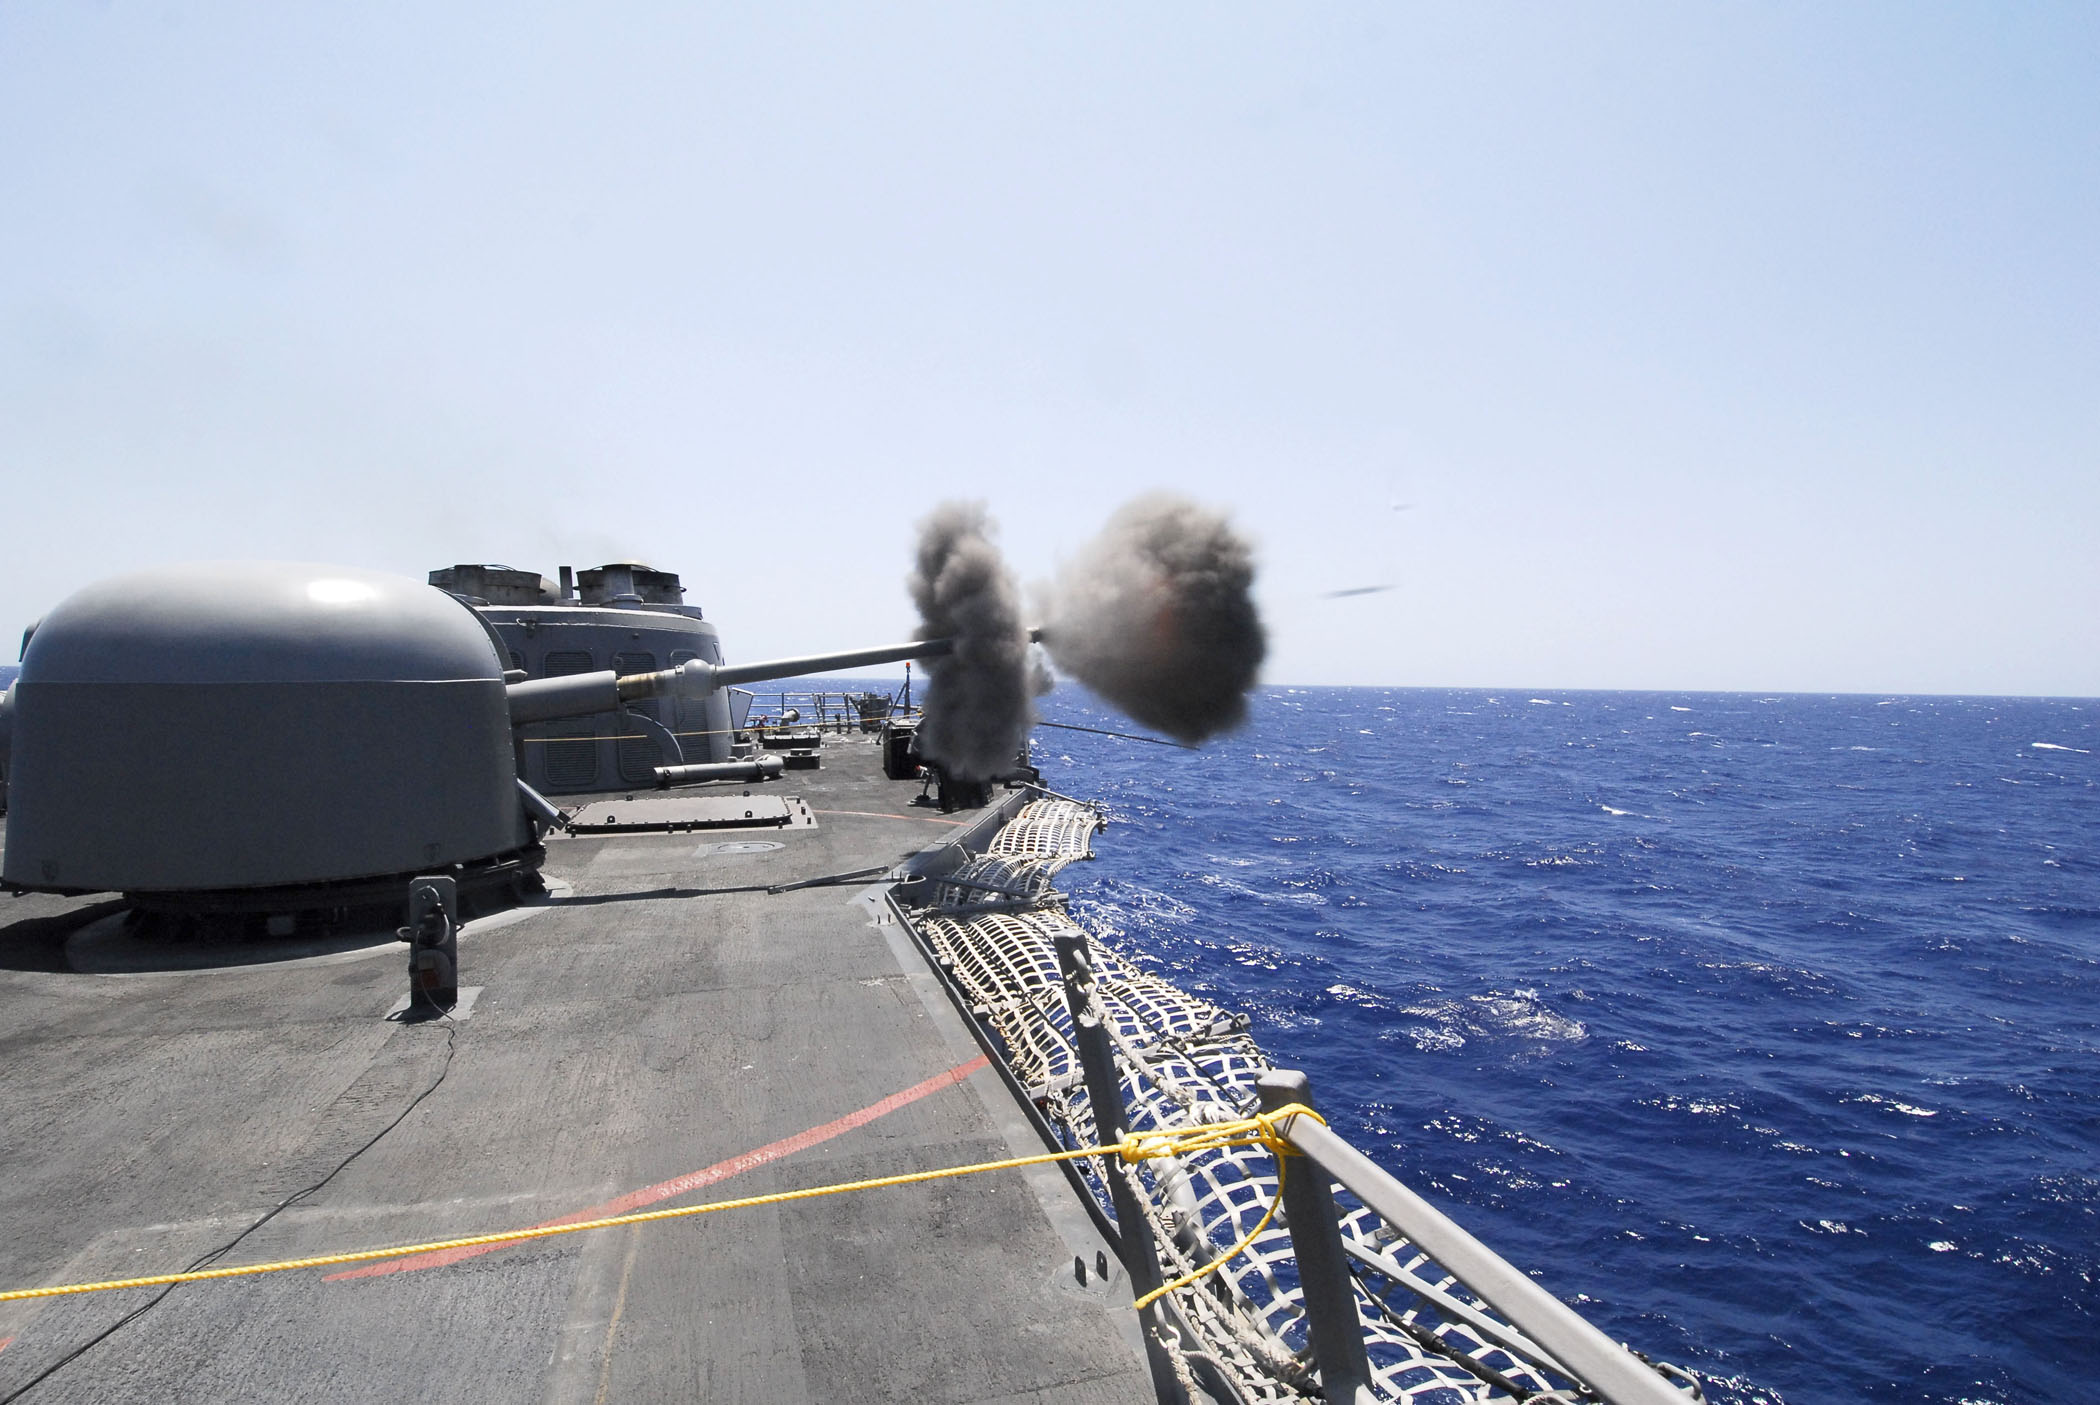 US_Navy_100708-N-7638K-054_The_guided-missile_frigate_USS_Taylor_%28FFG_50%29_conducts_a_live-fire_exercise_with_her_MK-75_76mm_gun_during_patrol_in_the_Adriatic_Sea._Taylor_is_on_a_scheduled_deployment_in_the_U.S._6th_Fleet_area_o.jpg